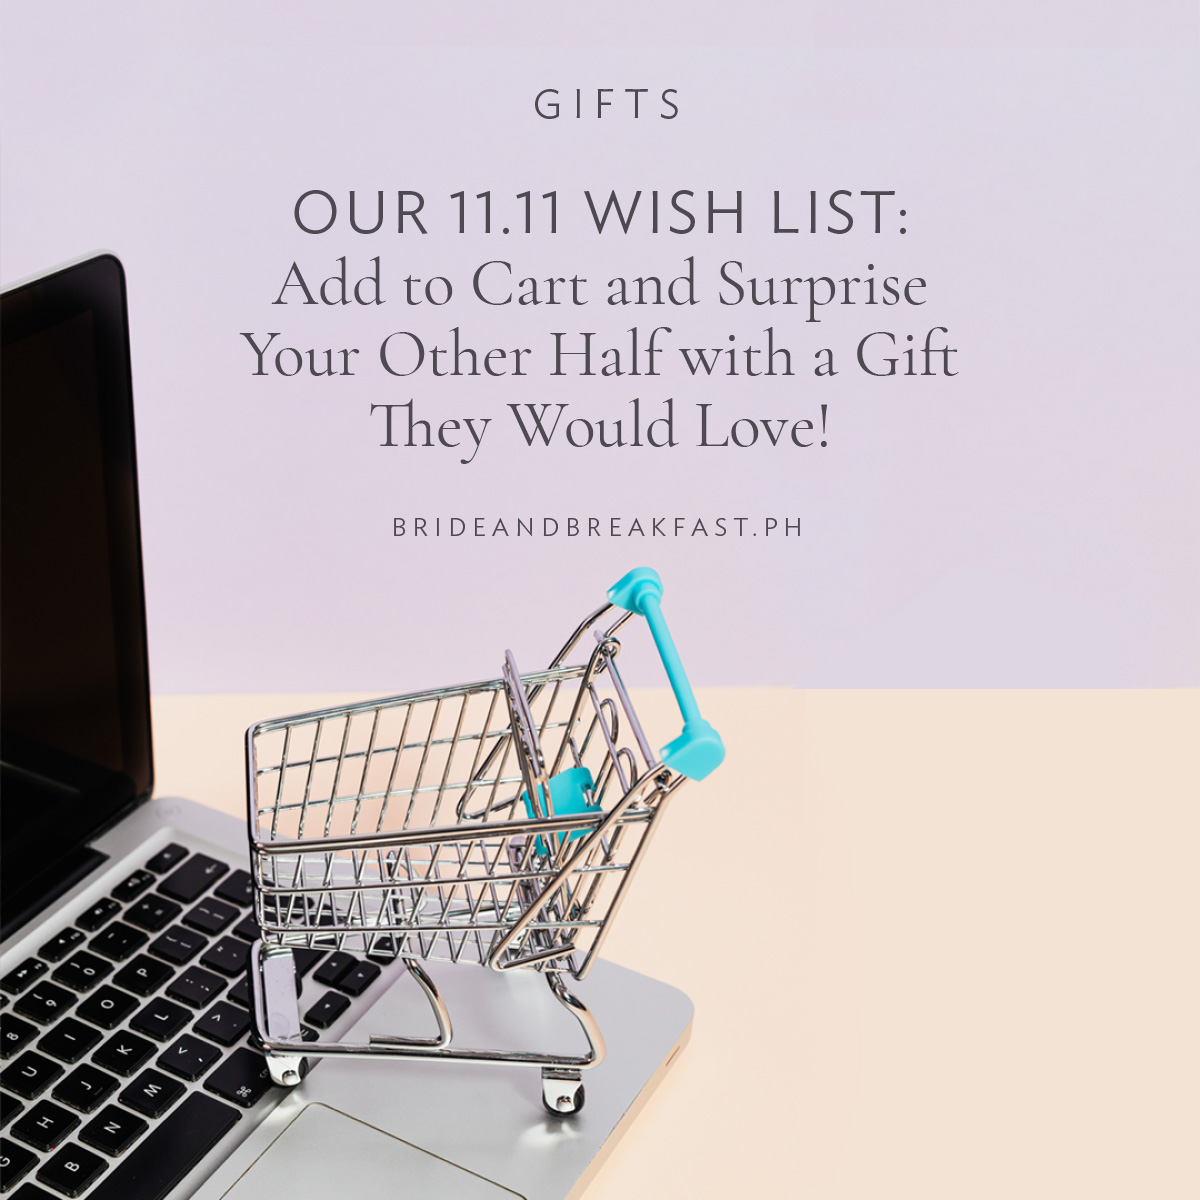 Our 11.11 Wish List: Add to Cart and Surprise Your Other Half with a Gift They Would Love!